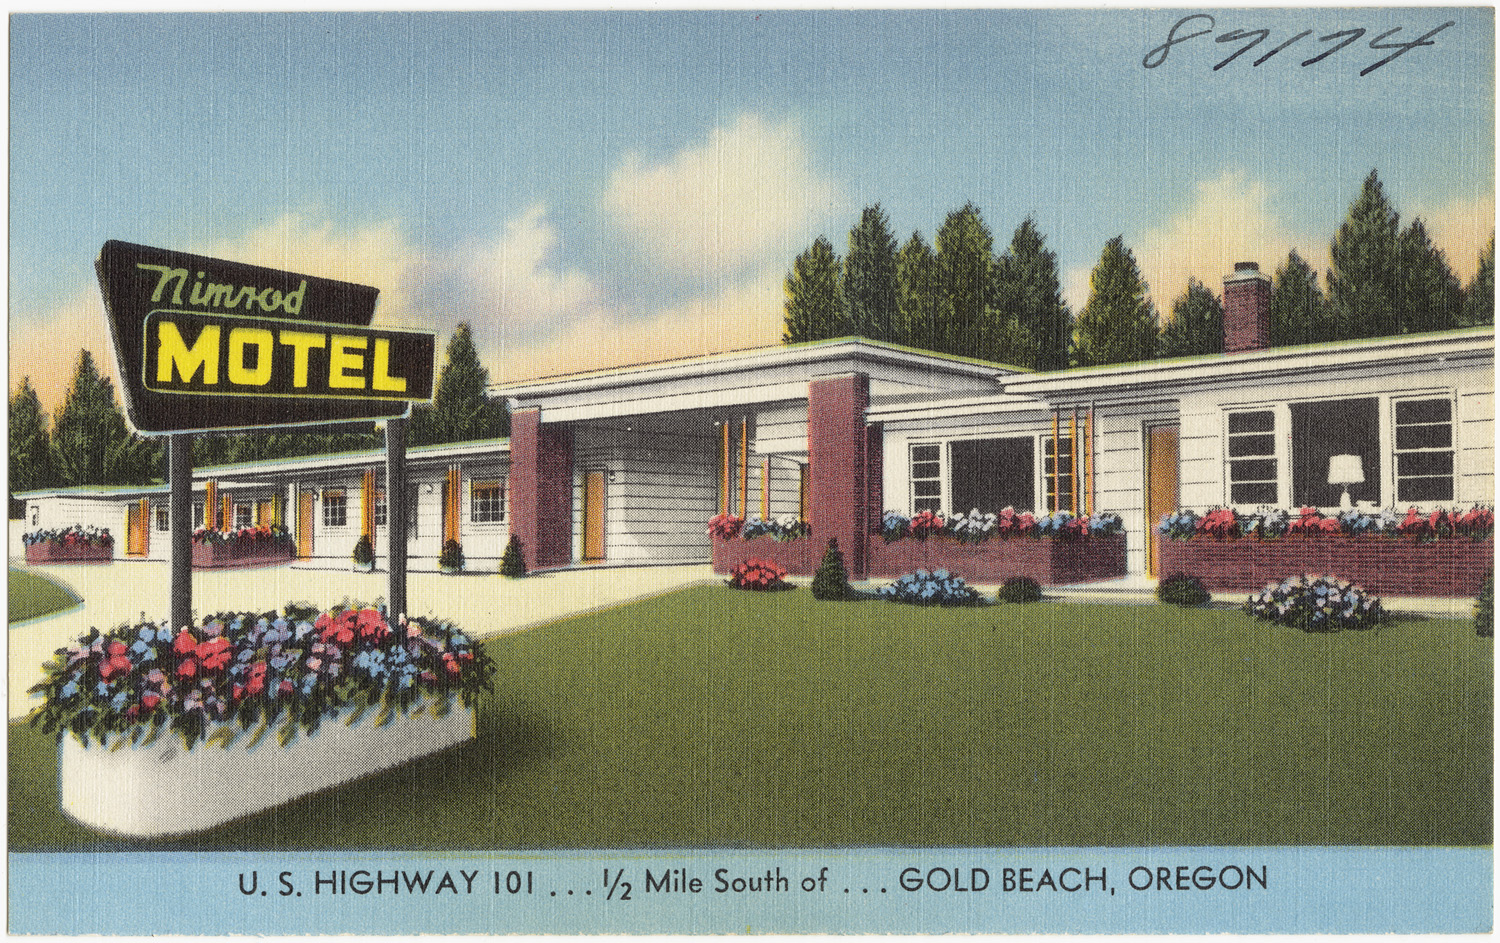 the vintage postcard is of a motel